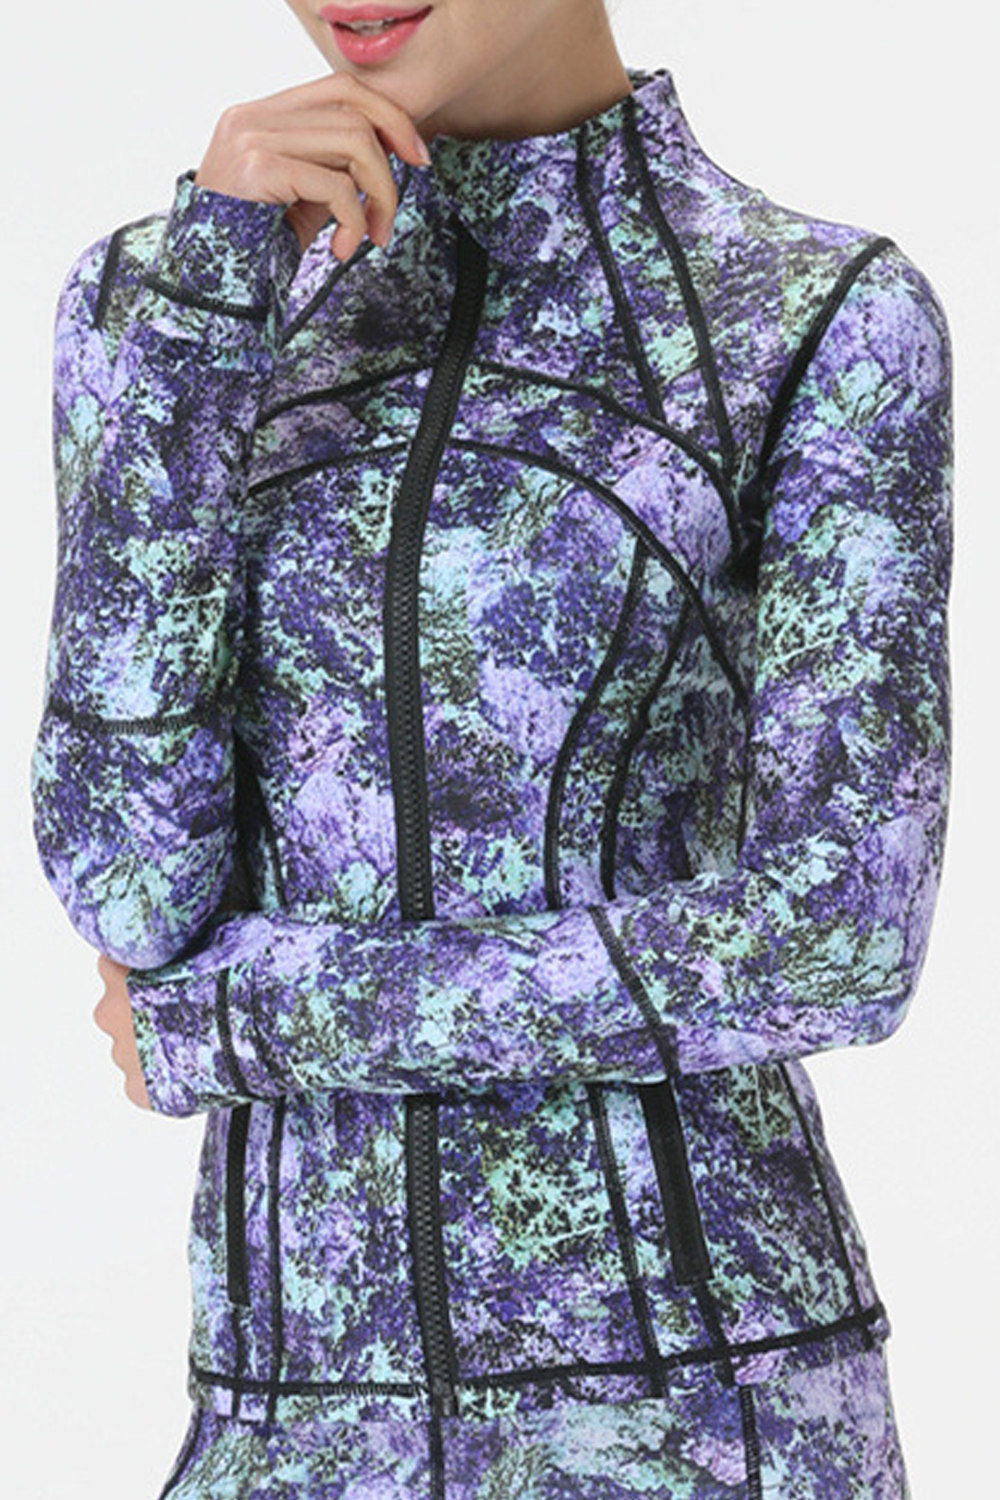 Selected Color is lavender jacket